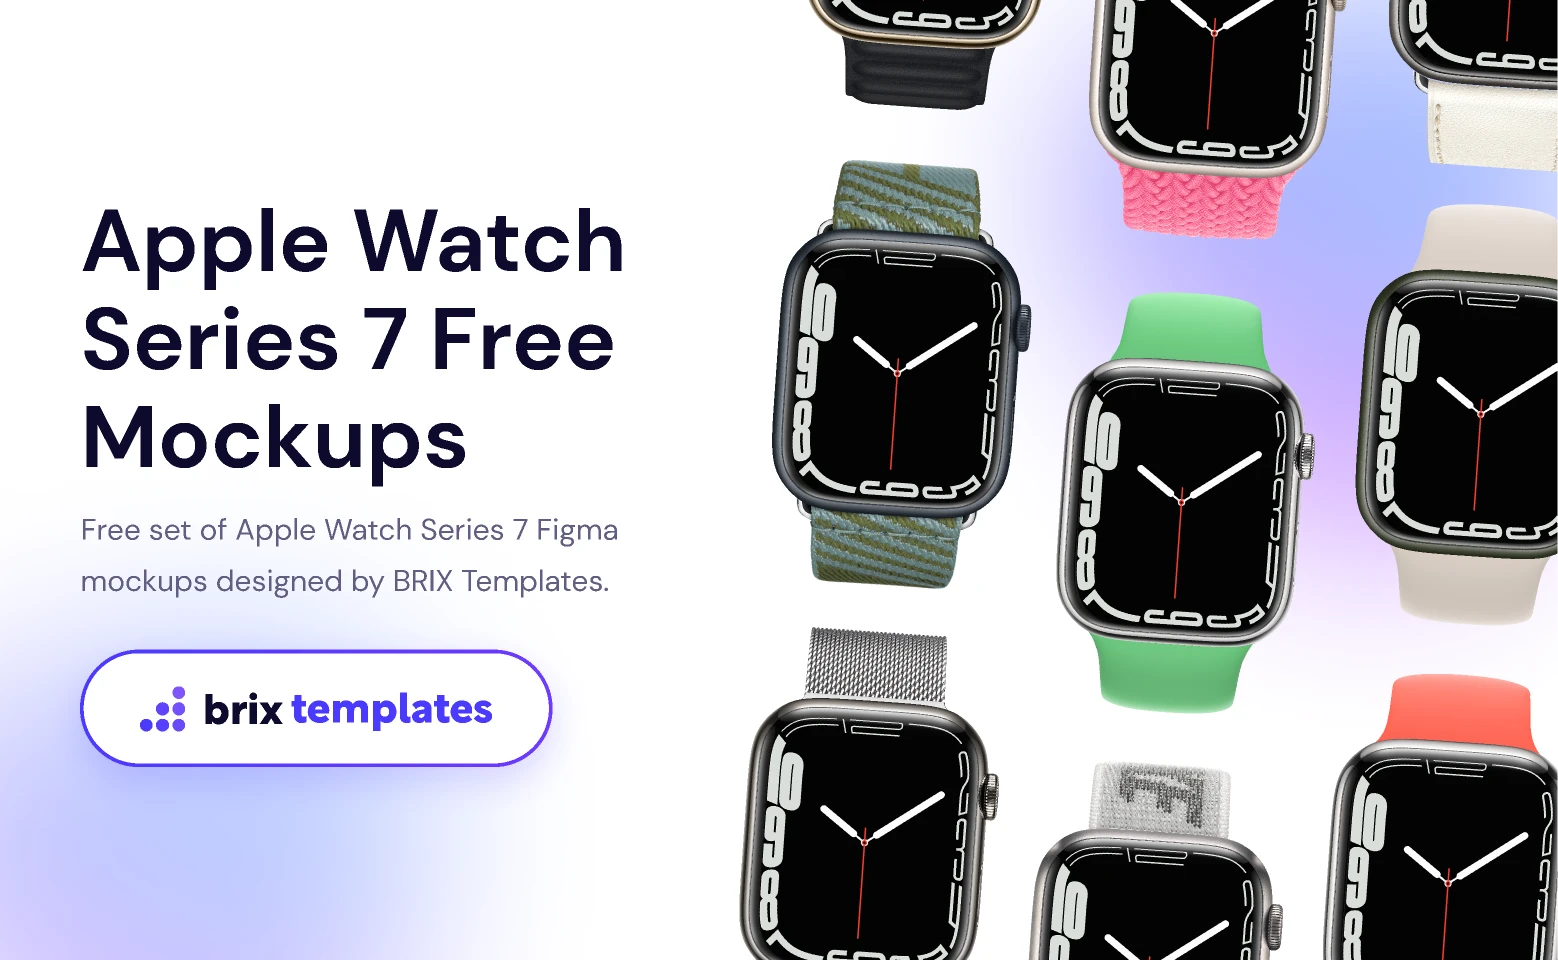 Apple Watch Series 7 Free Mockups | BRIX Templates for Figma and Adobe XD